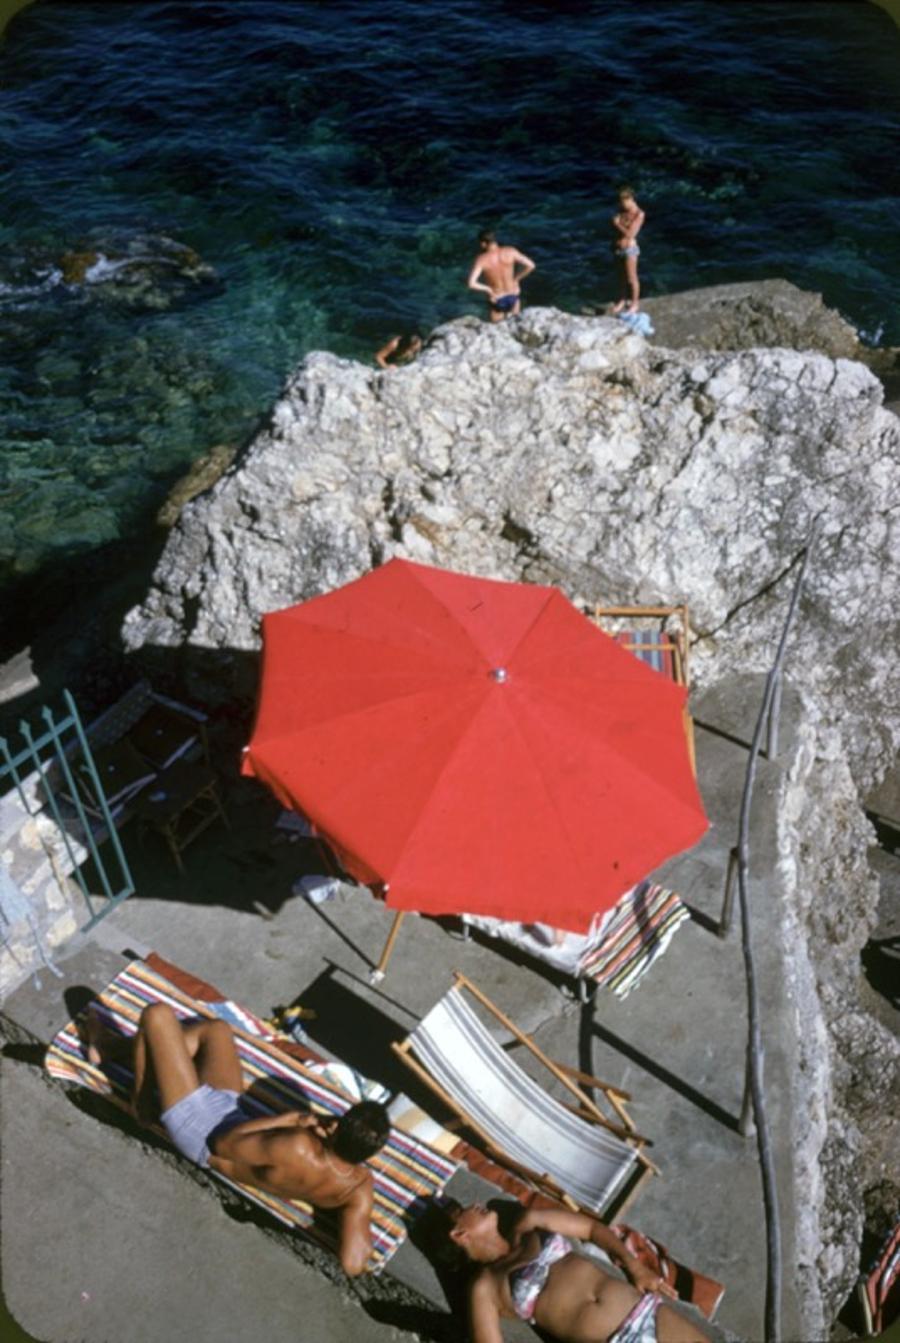 La Canzone del Mare 
1958
by Slim Aarons

Slim Aarons Limited Estate Edition

La Canzone del Mare in Capri, Italy, July 1958. 

unframed
c type print
printed 2023
24 x 20"  - paper size

Limited to 150 prints only – regardless of paper size

blind